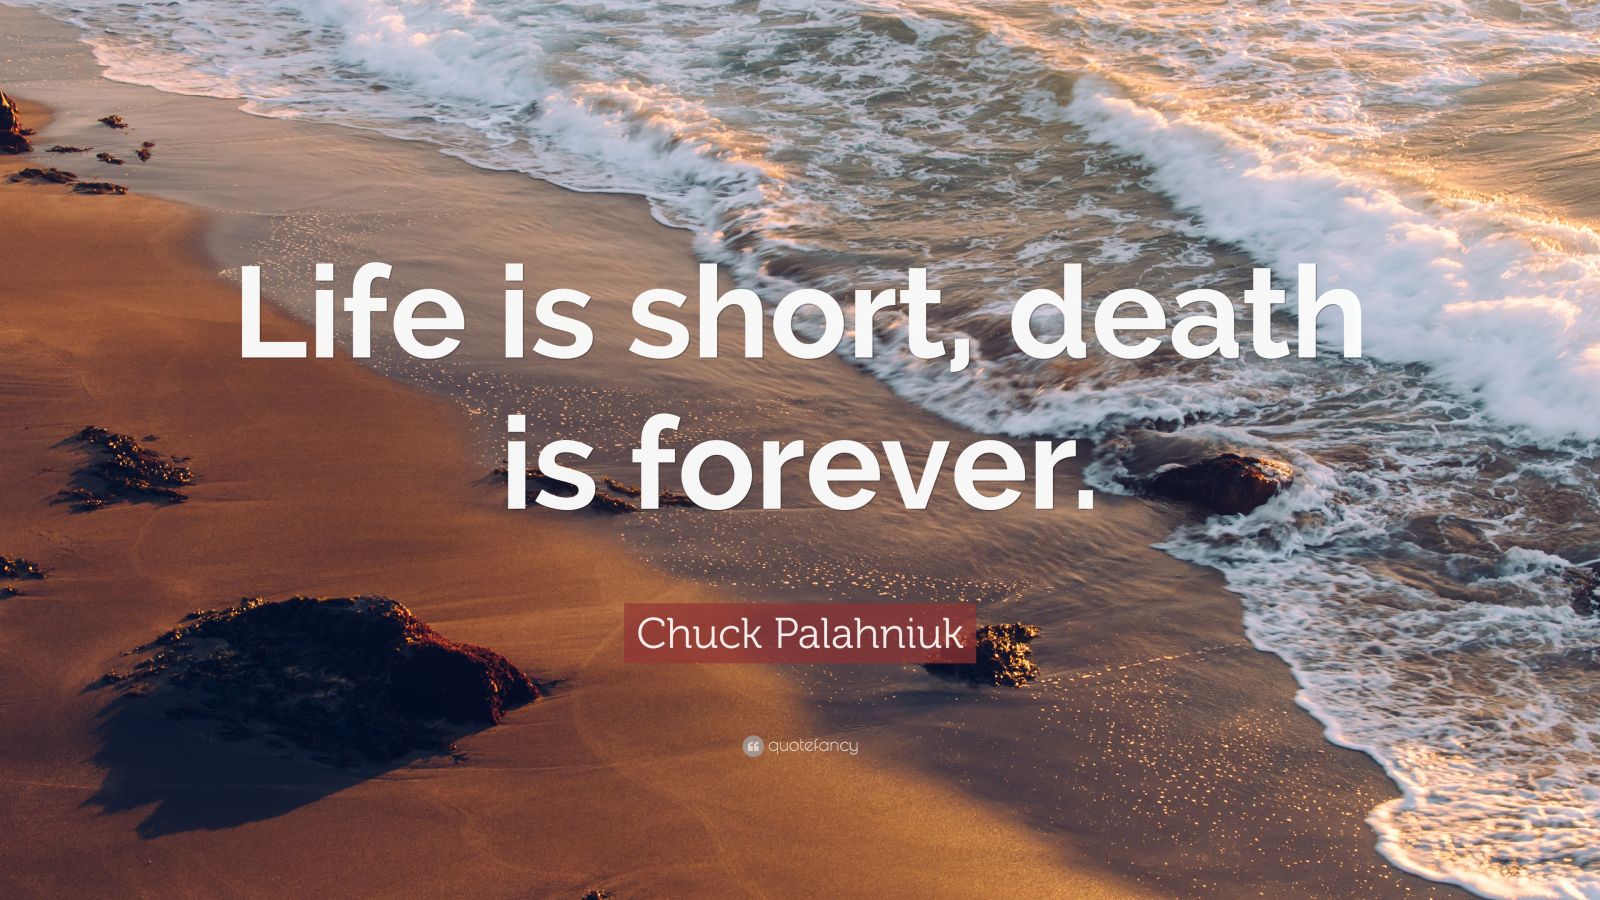 Chuck Palahniuk Quote: “Life is short, death is forever.” (12